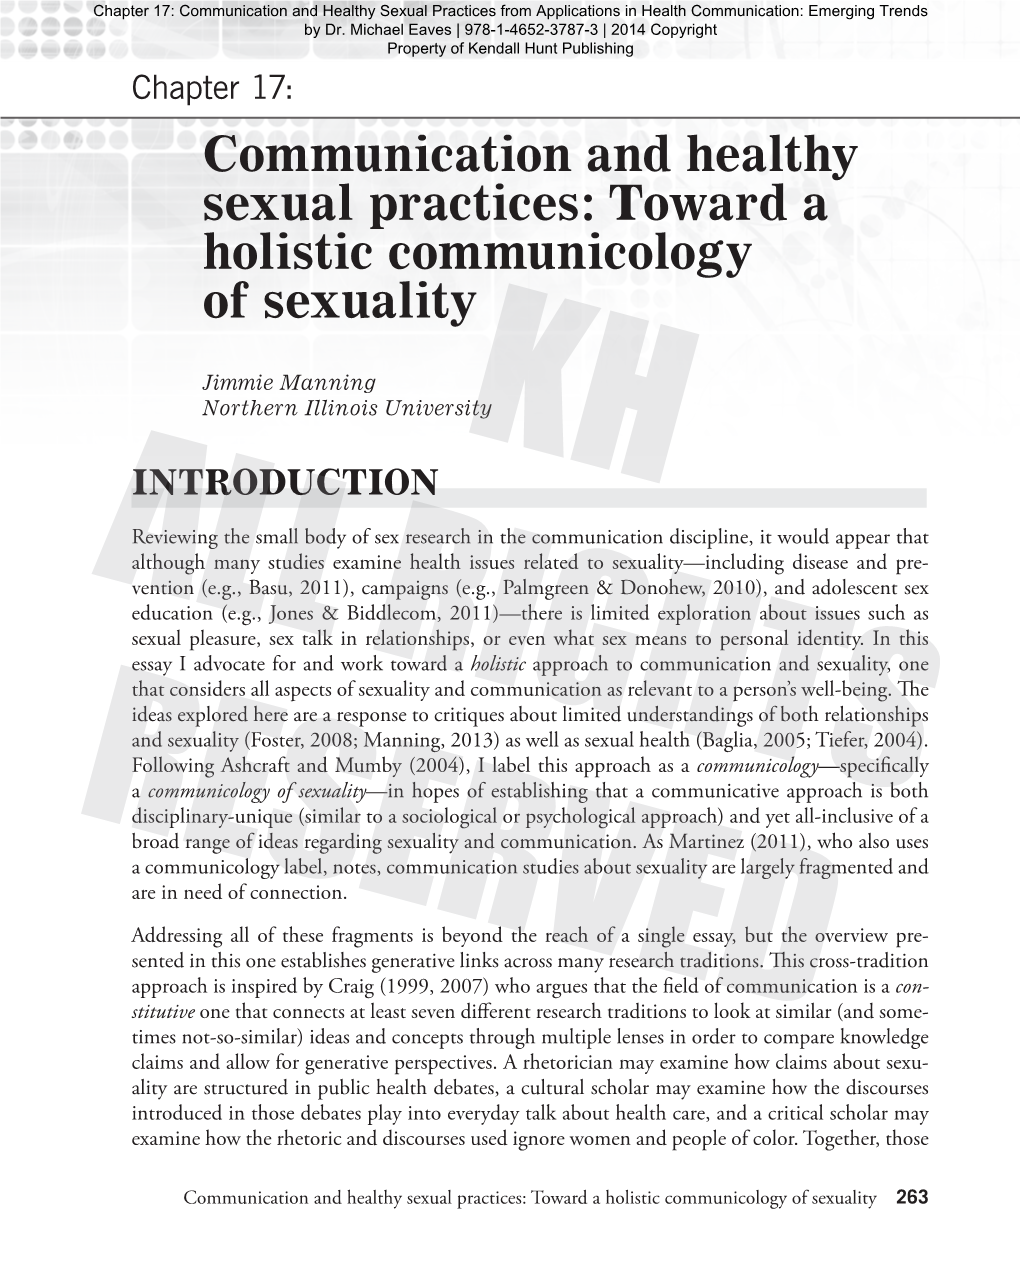 Communication and Healthy Sexual Practices from Applications in Health Communication: Emerging Trends by Dr